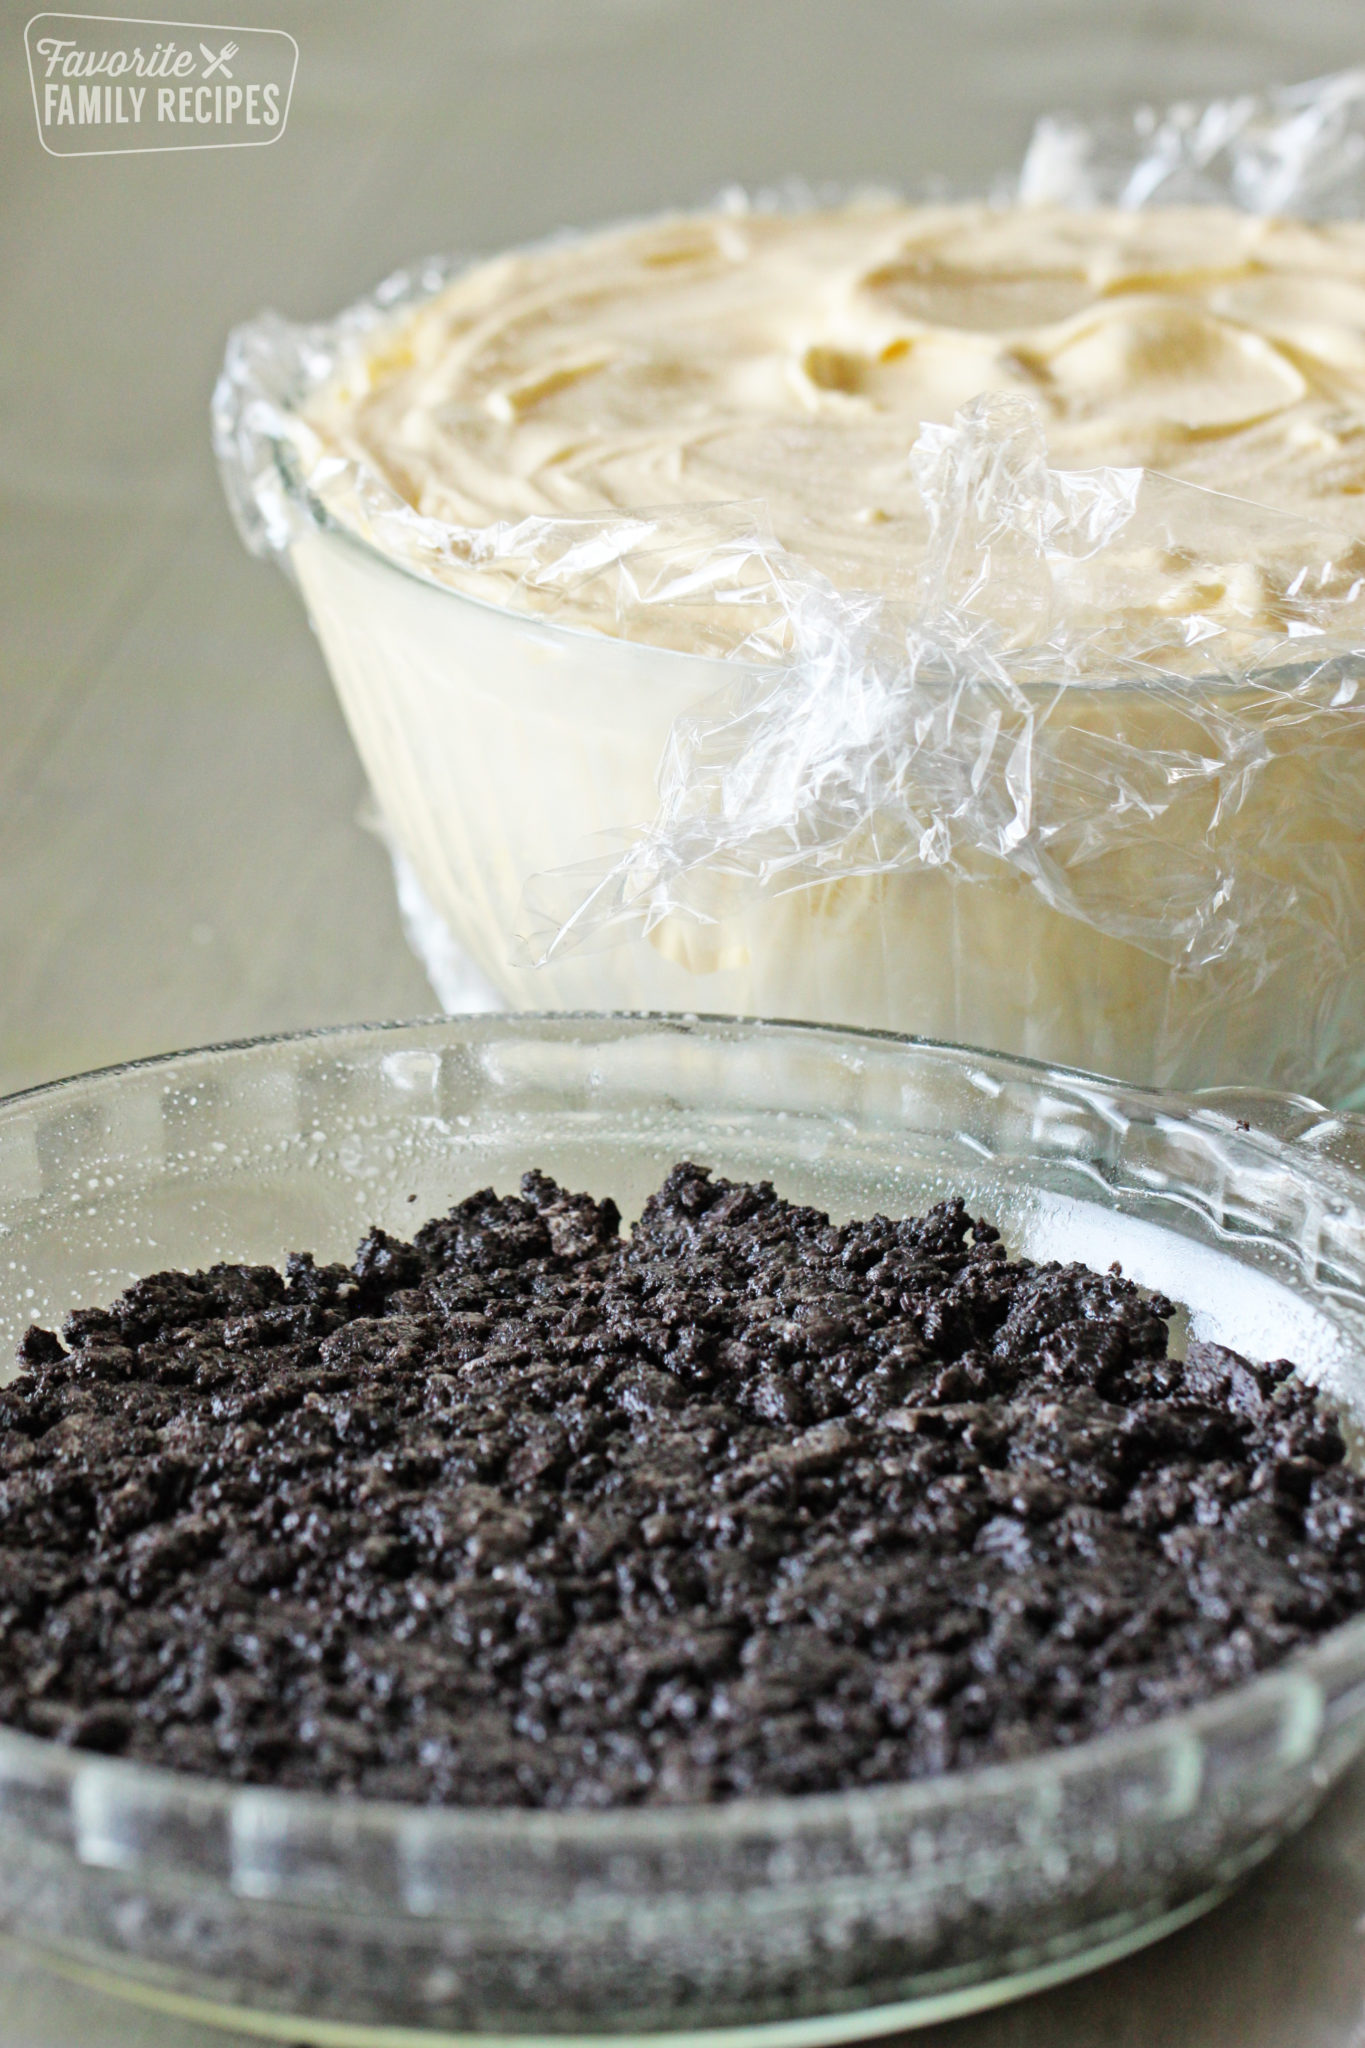 Oreo pie crust with a mixing bowl filled with macadamia nut ice cream